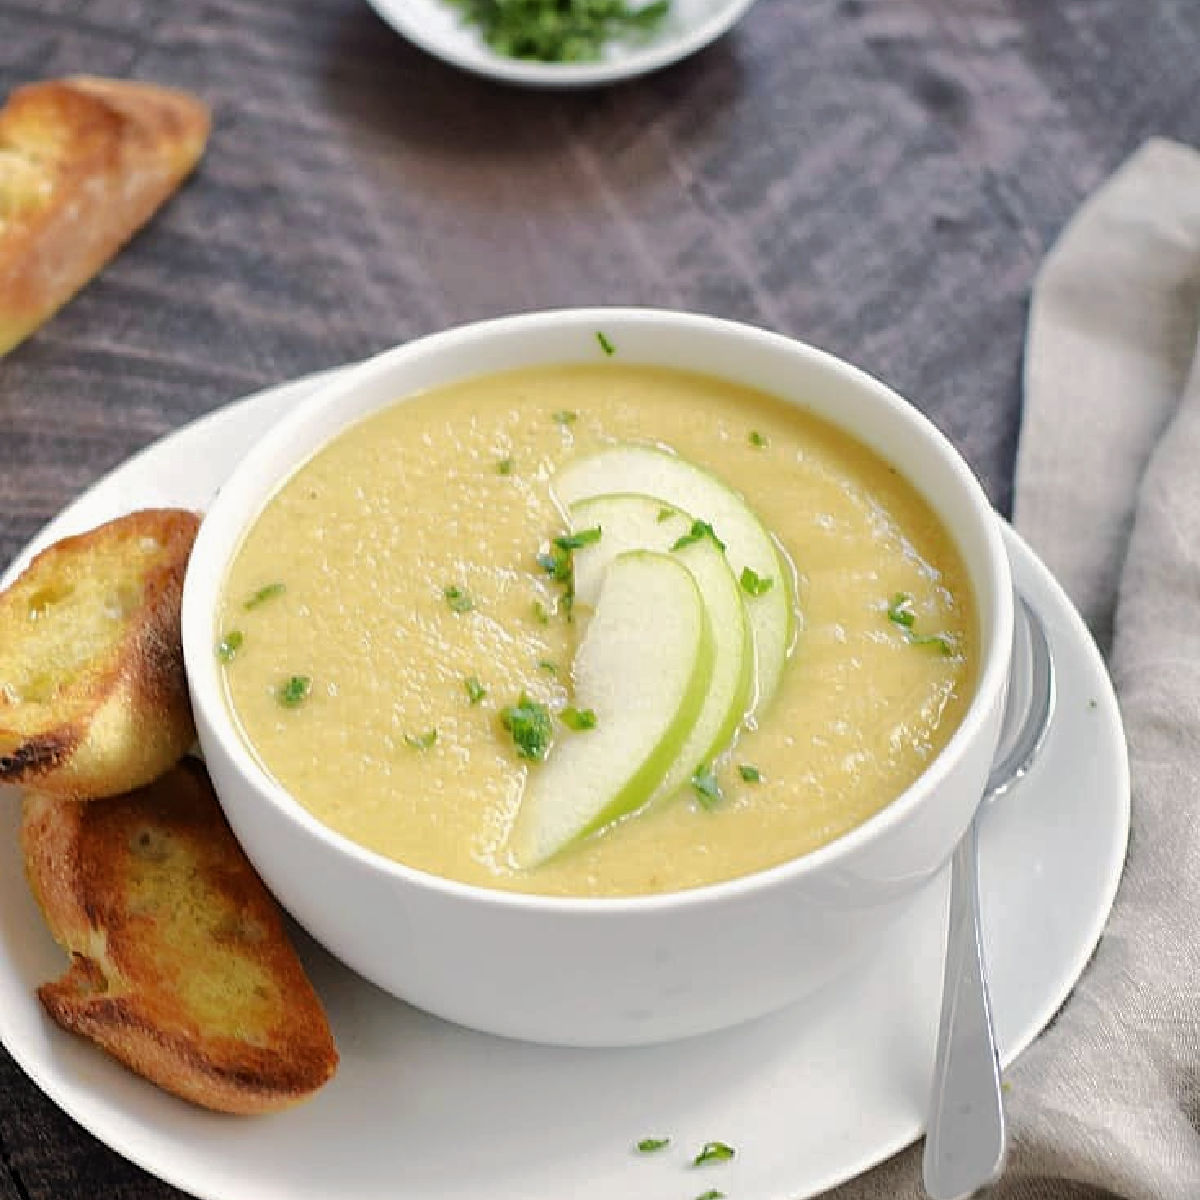 A bowl of creamy parsnip and apple soup topped with green apple slices.